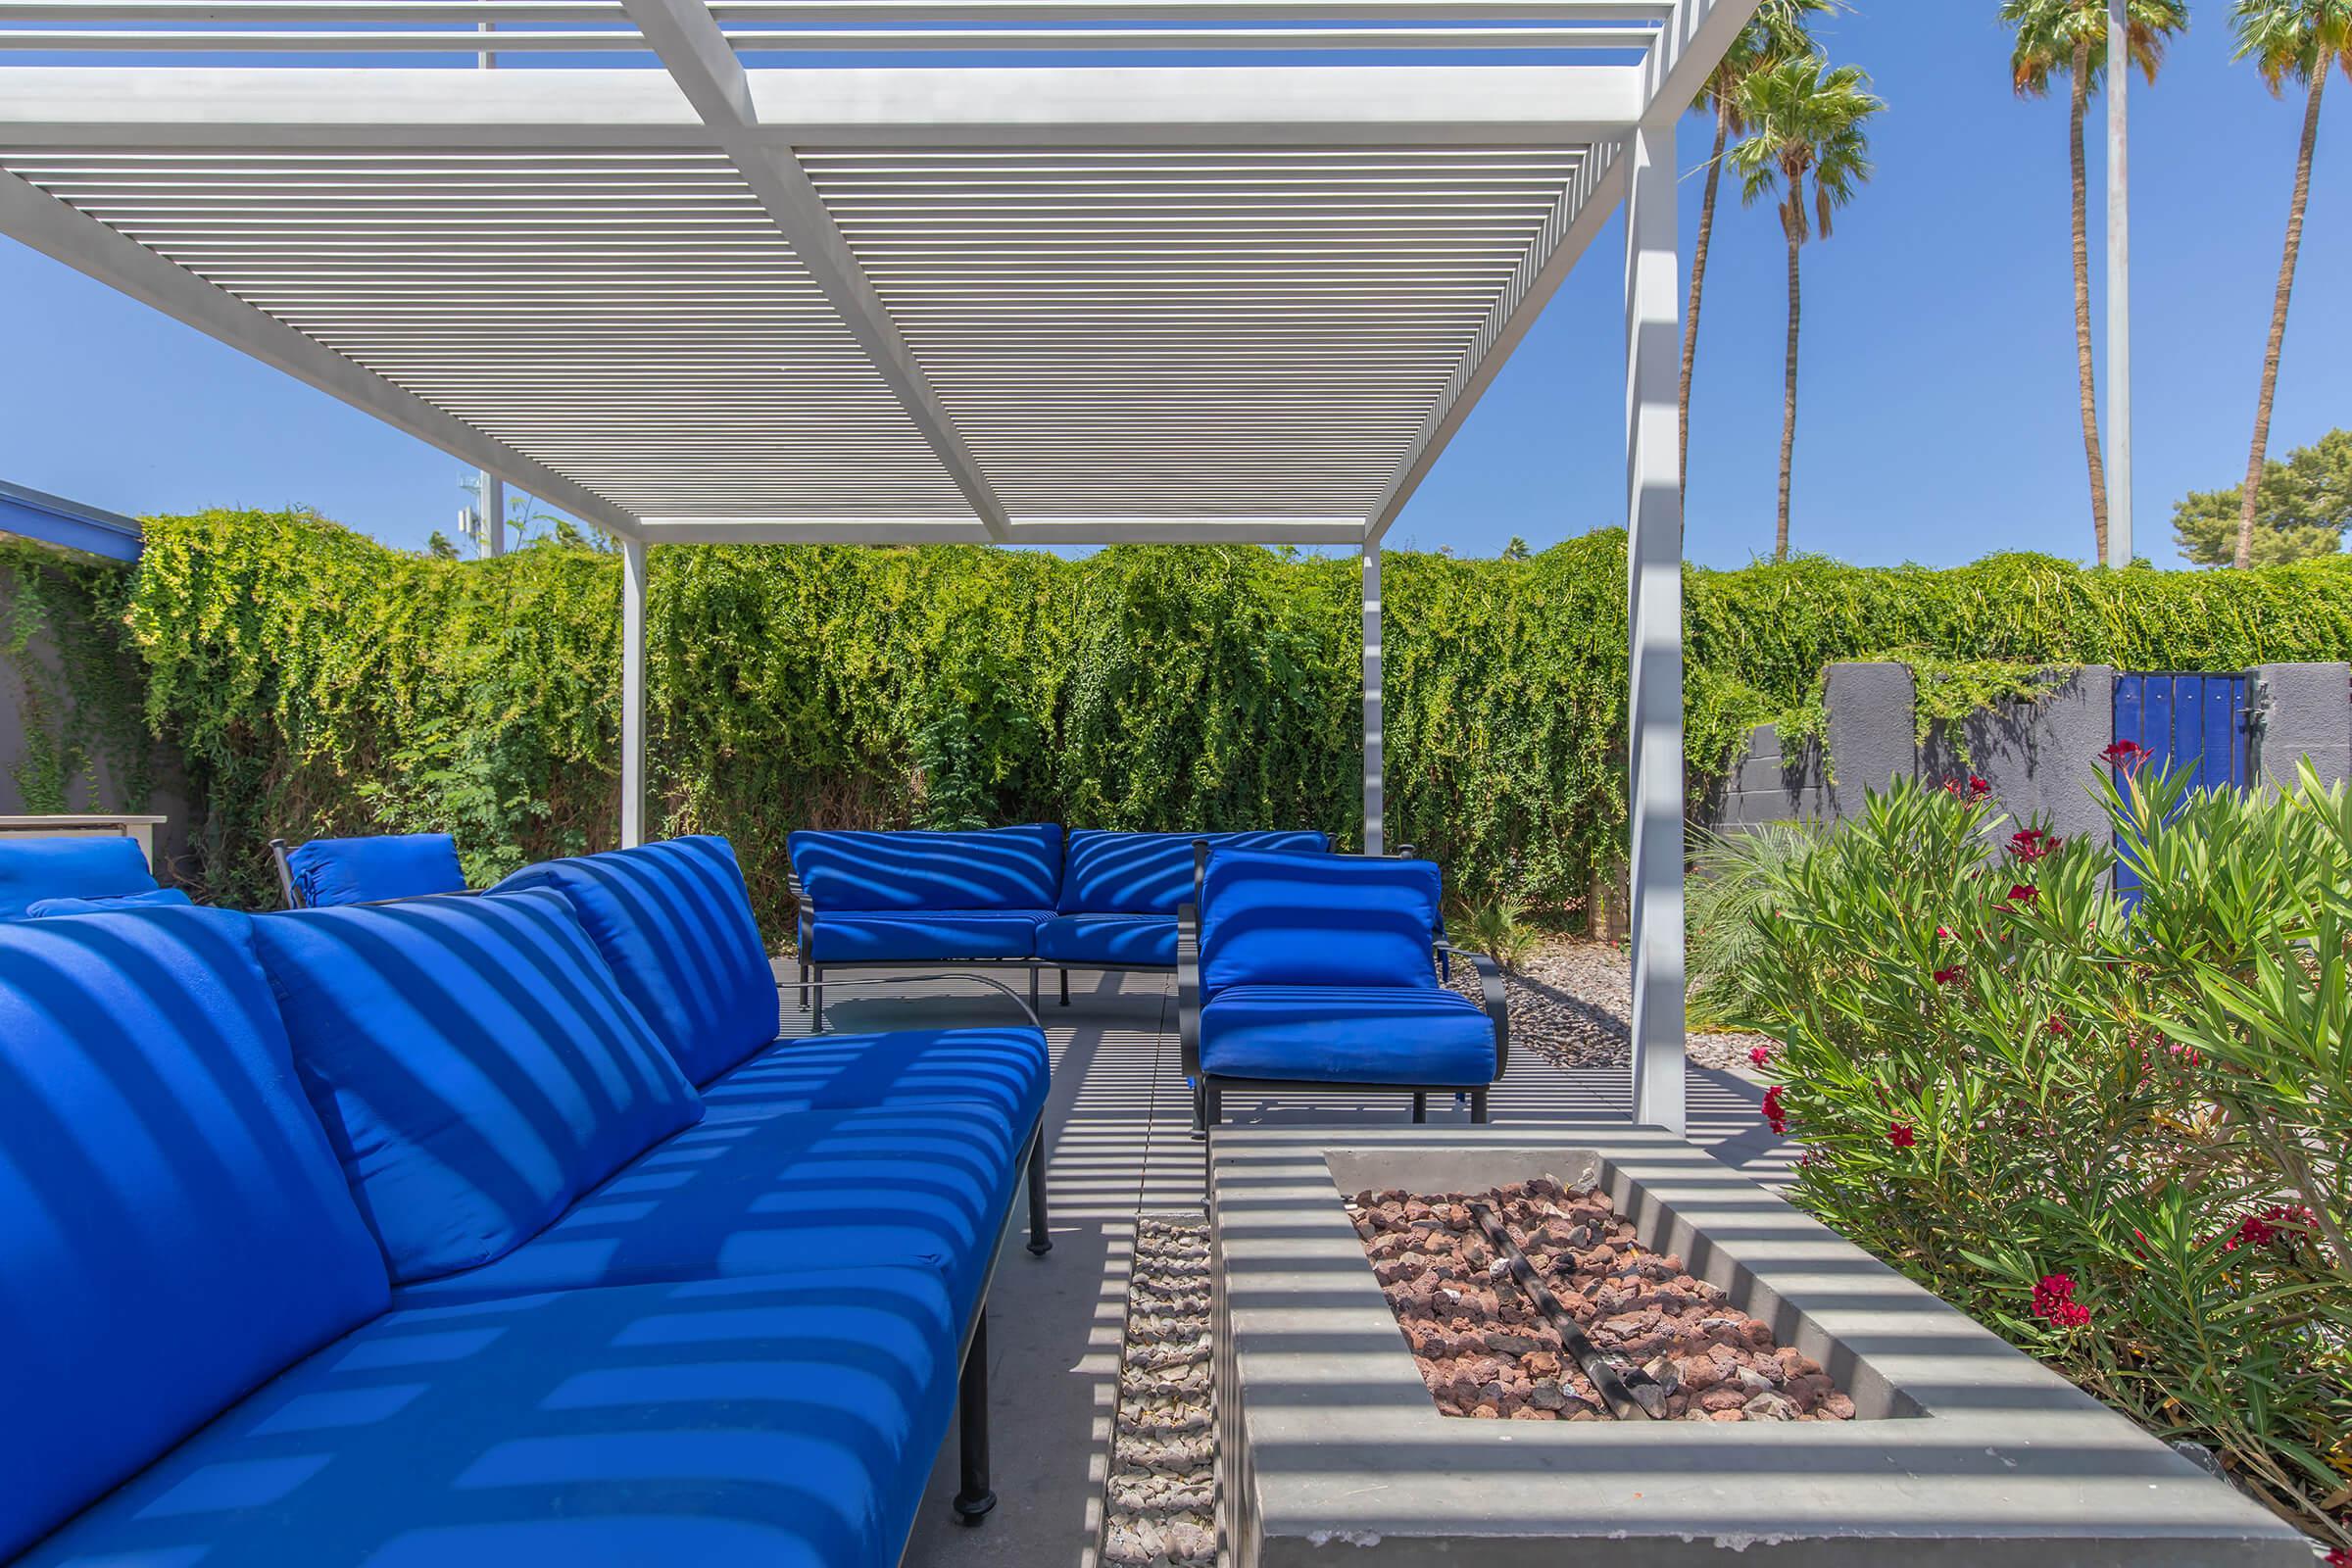 Outdoor patio area with blue lounge couch seating around an electric firepit